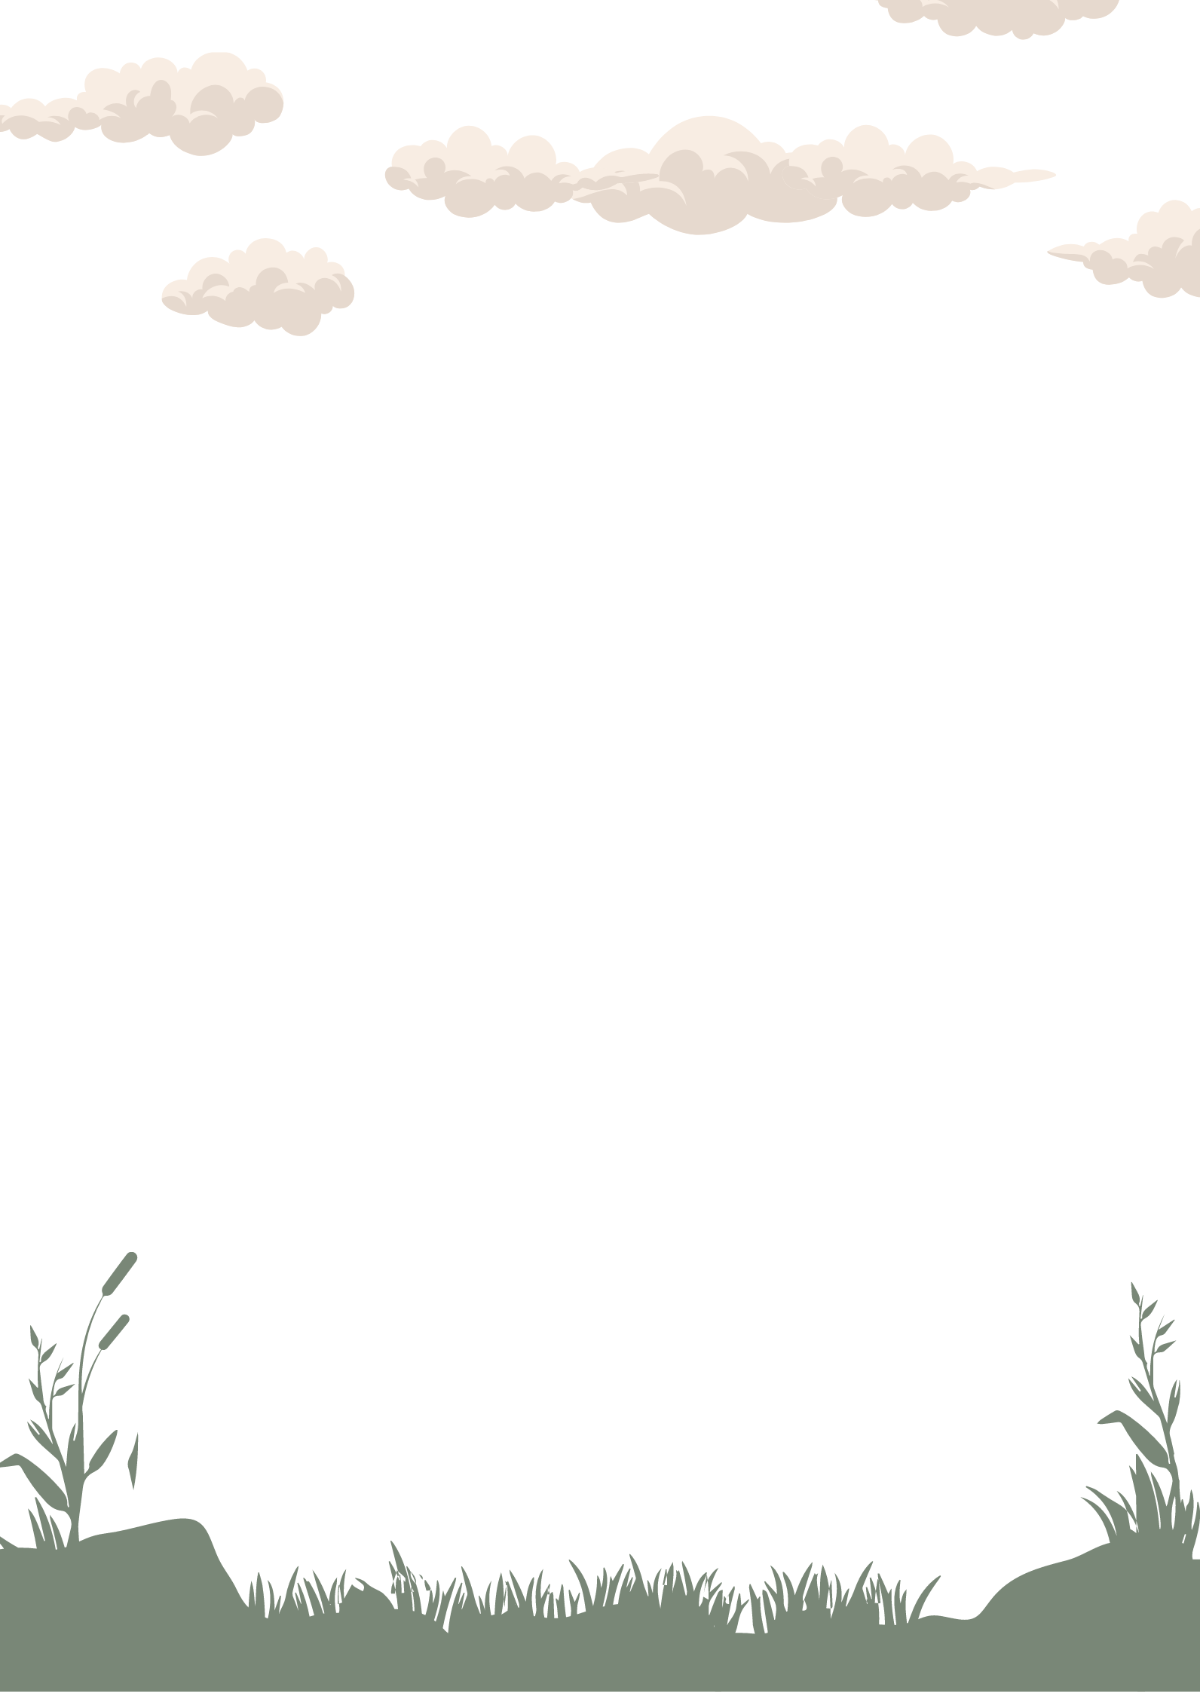 Grass Page Border Template